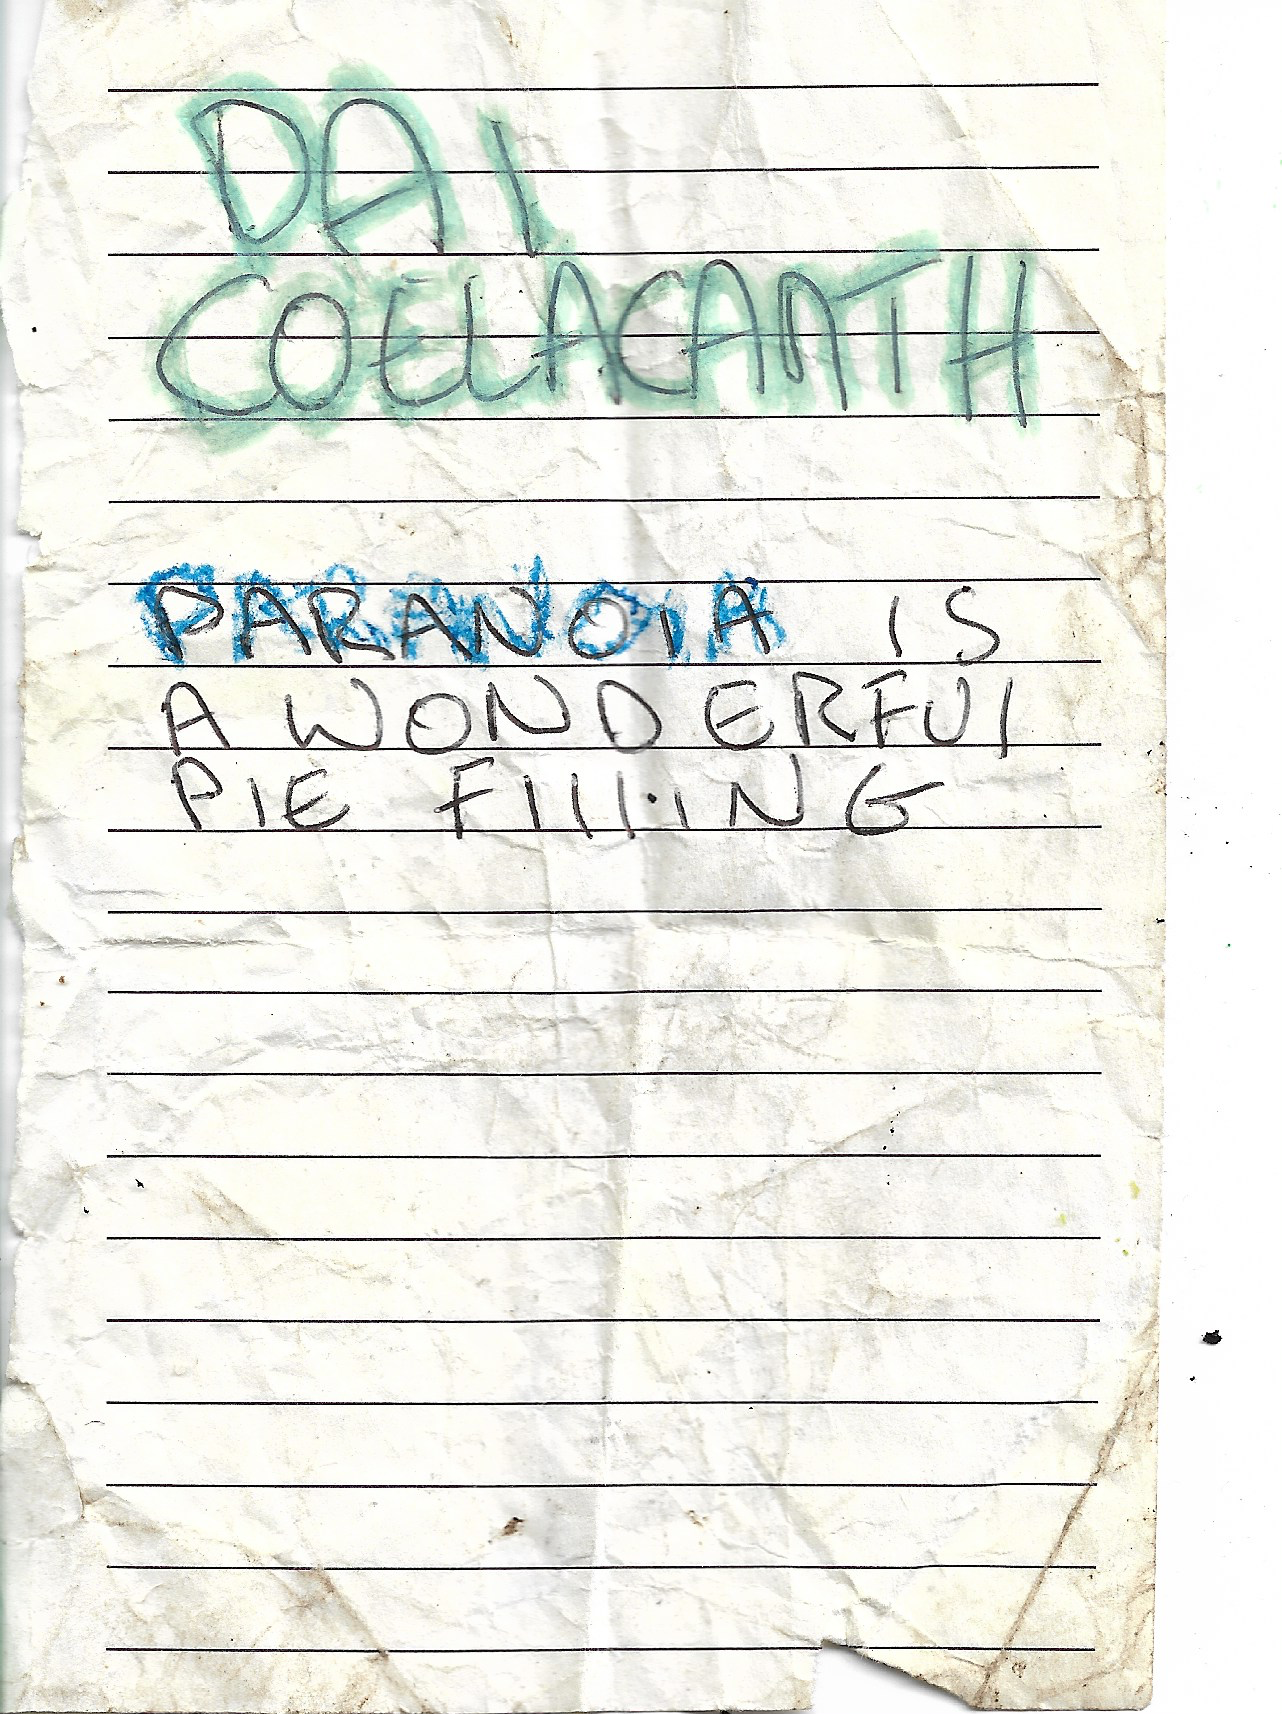 Dai Coelacanth – Paranoia is a wonderful pie filling